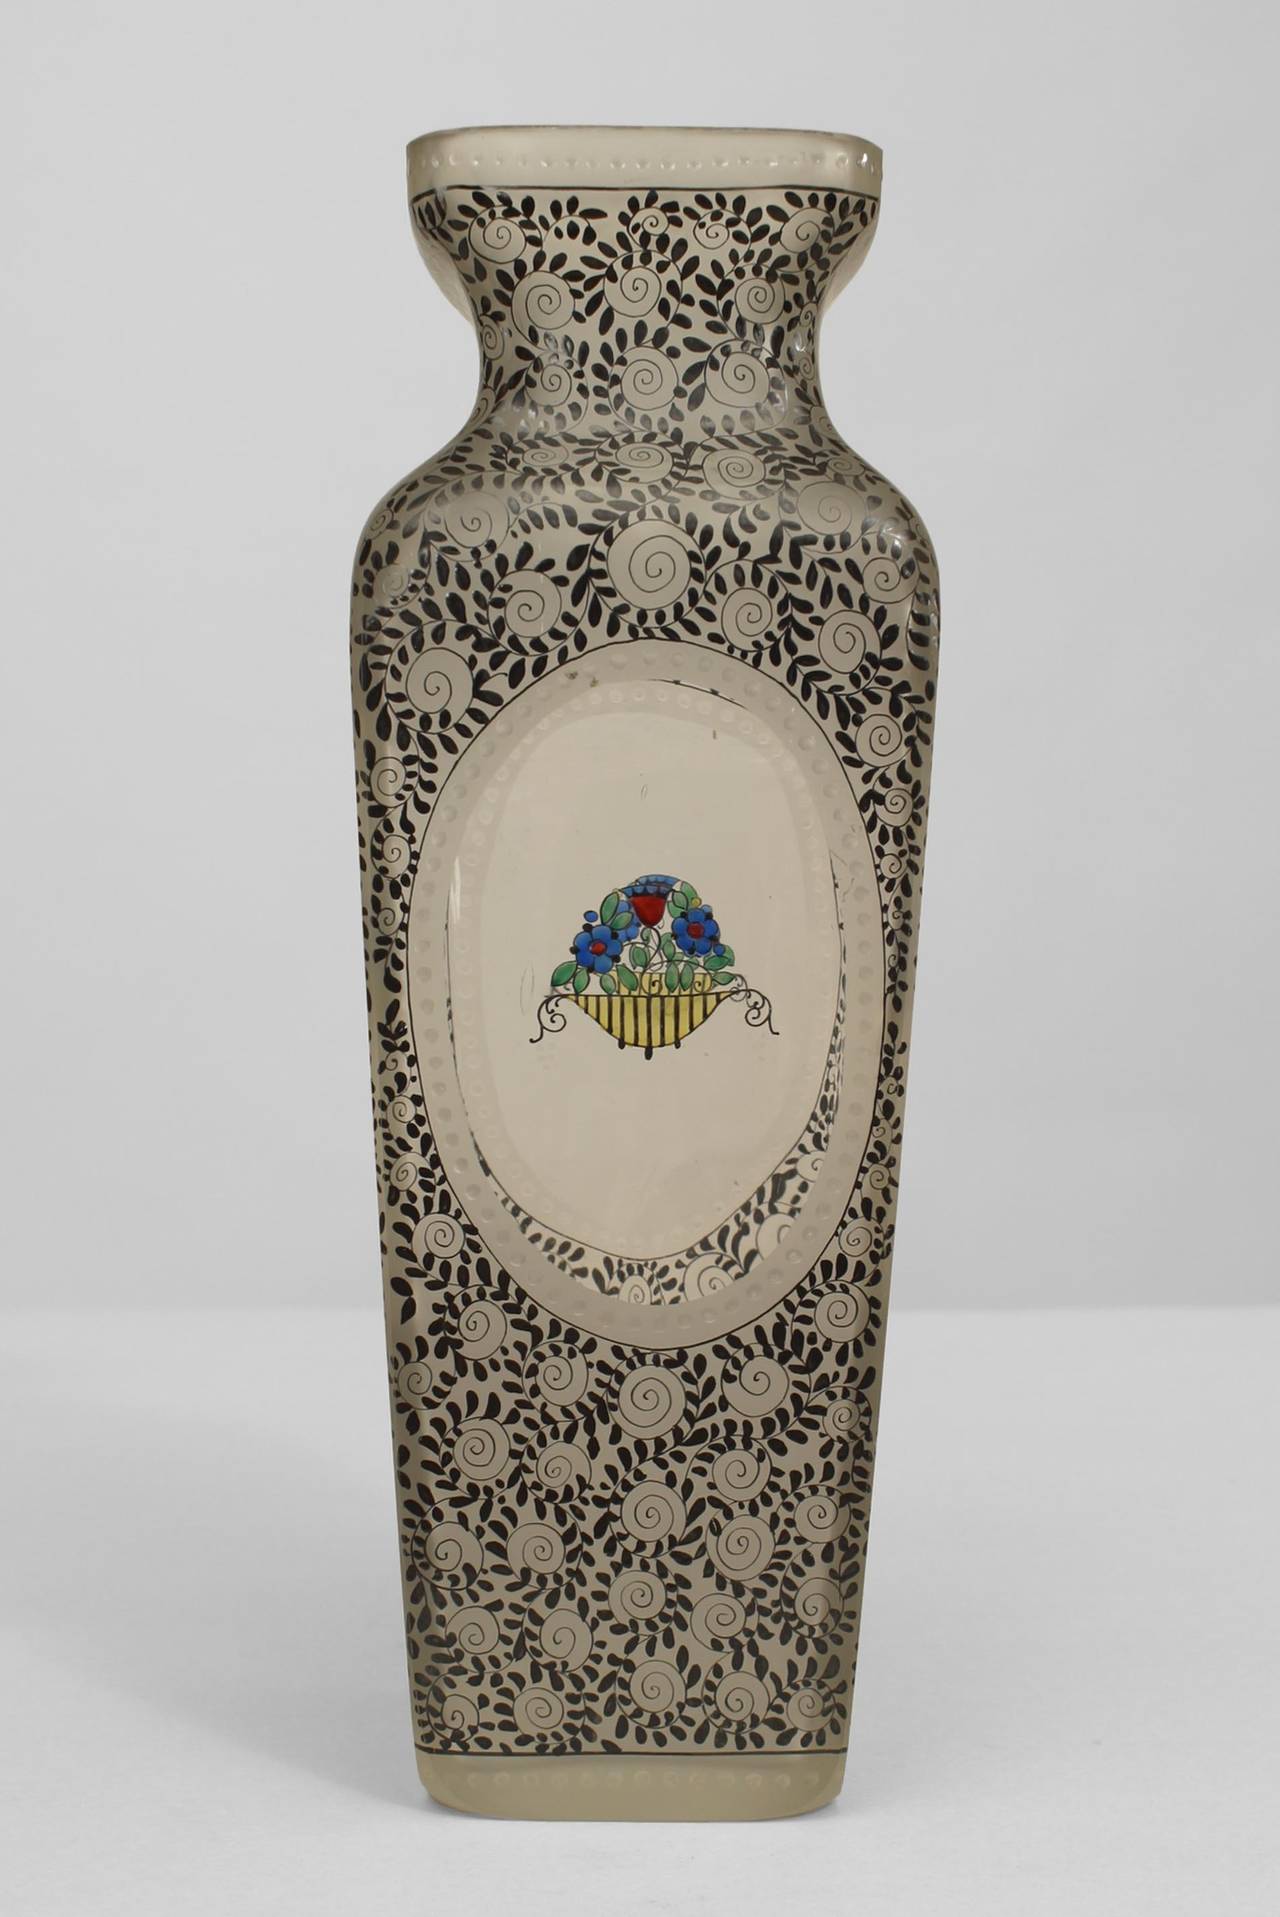 Austrian (Bohemia) Secessionist tapered square glass vase with black scroll & leaf design & oval panels with colored urn & flowers (att: Urban Janke & Ludwig Heinrich Jungnickel.
